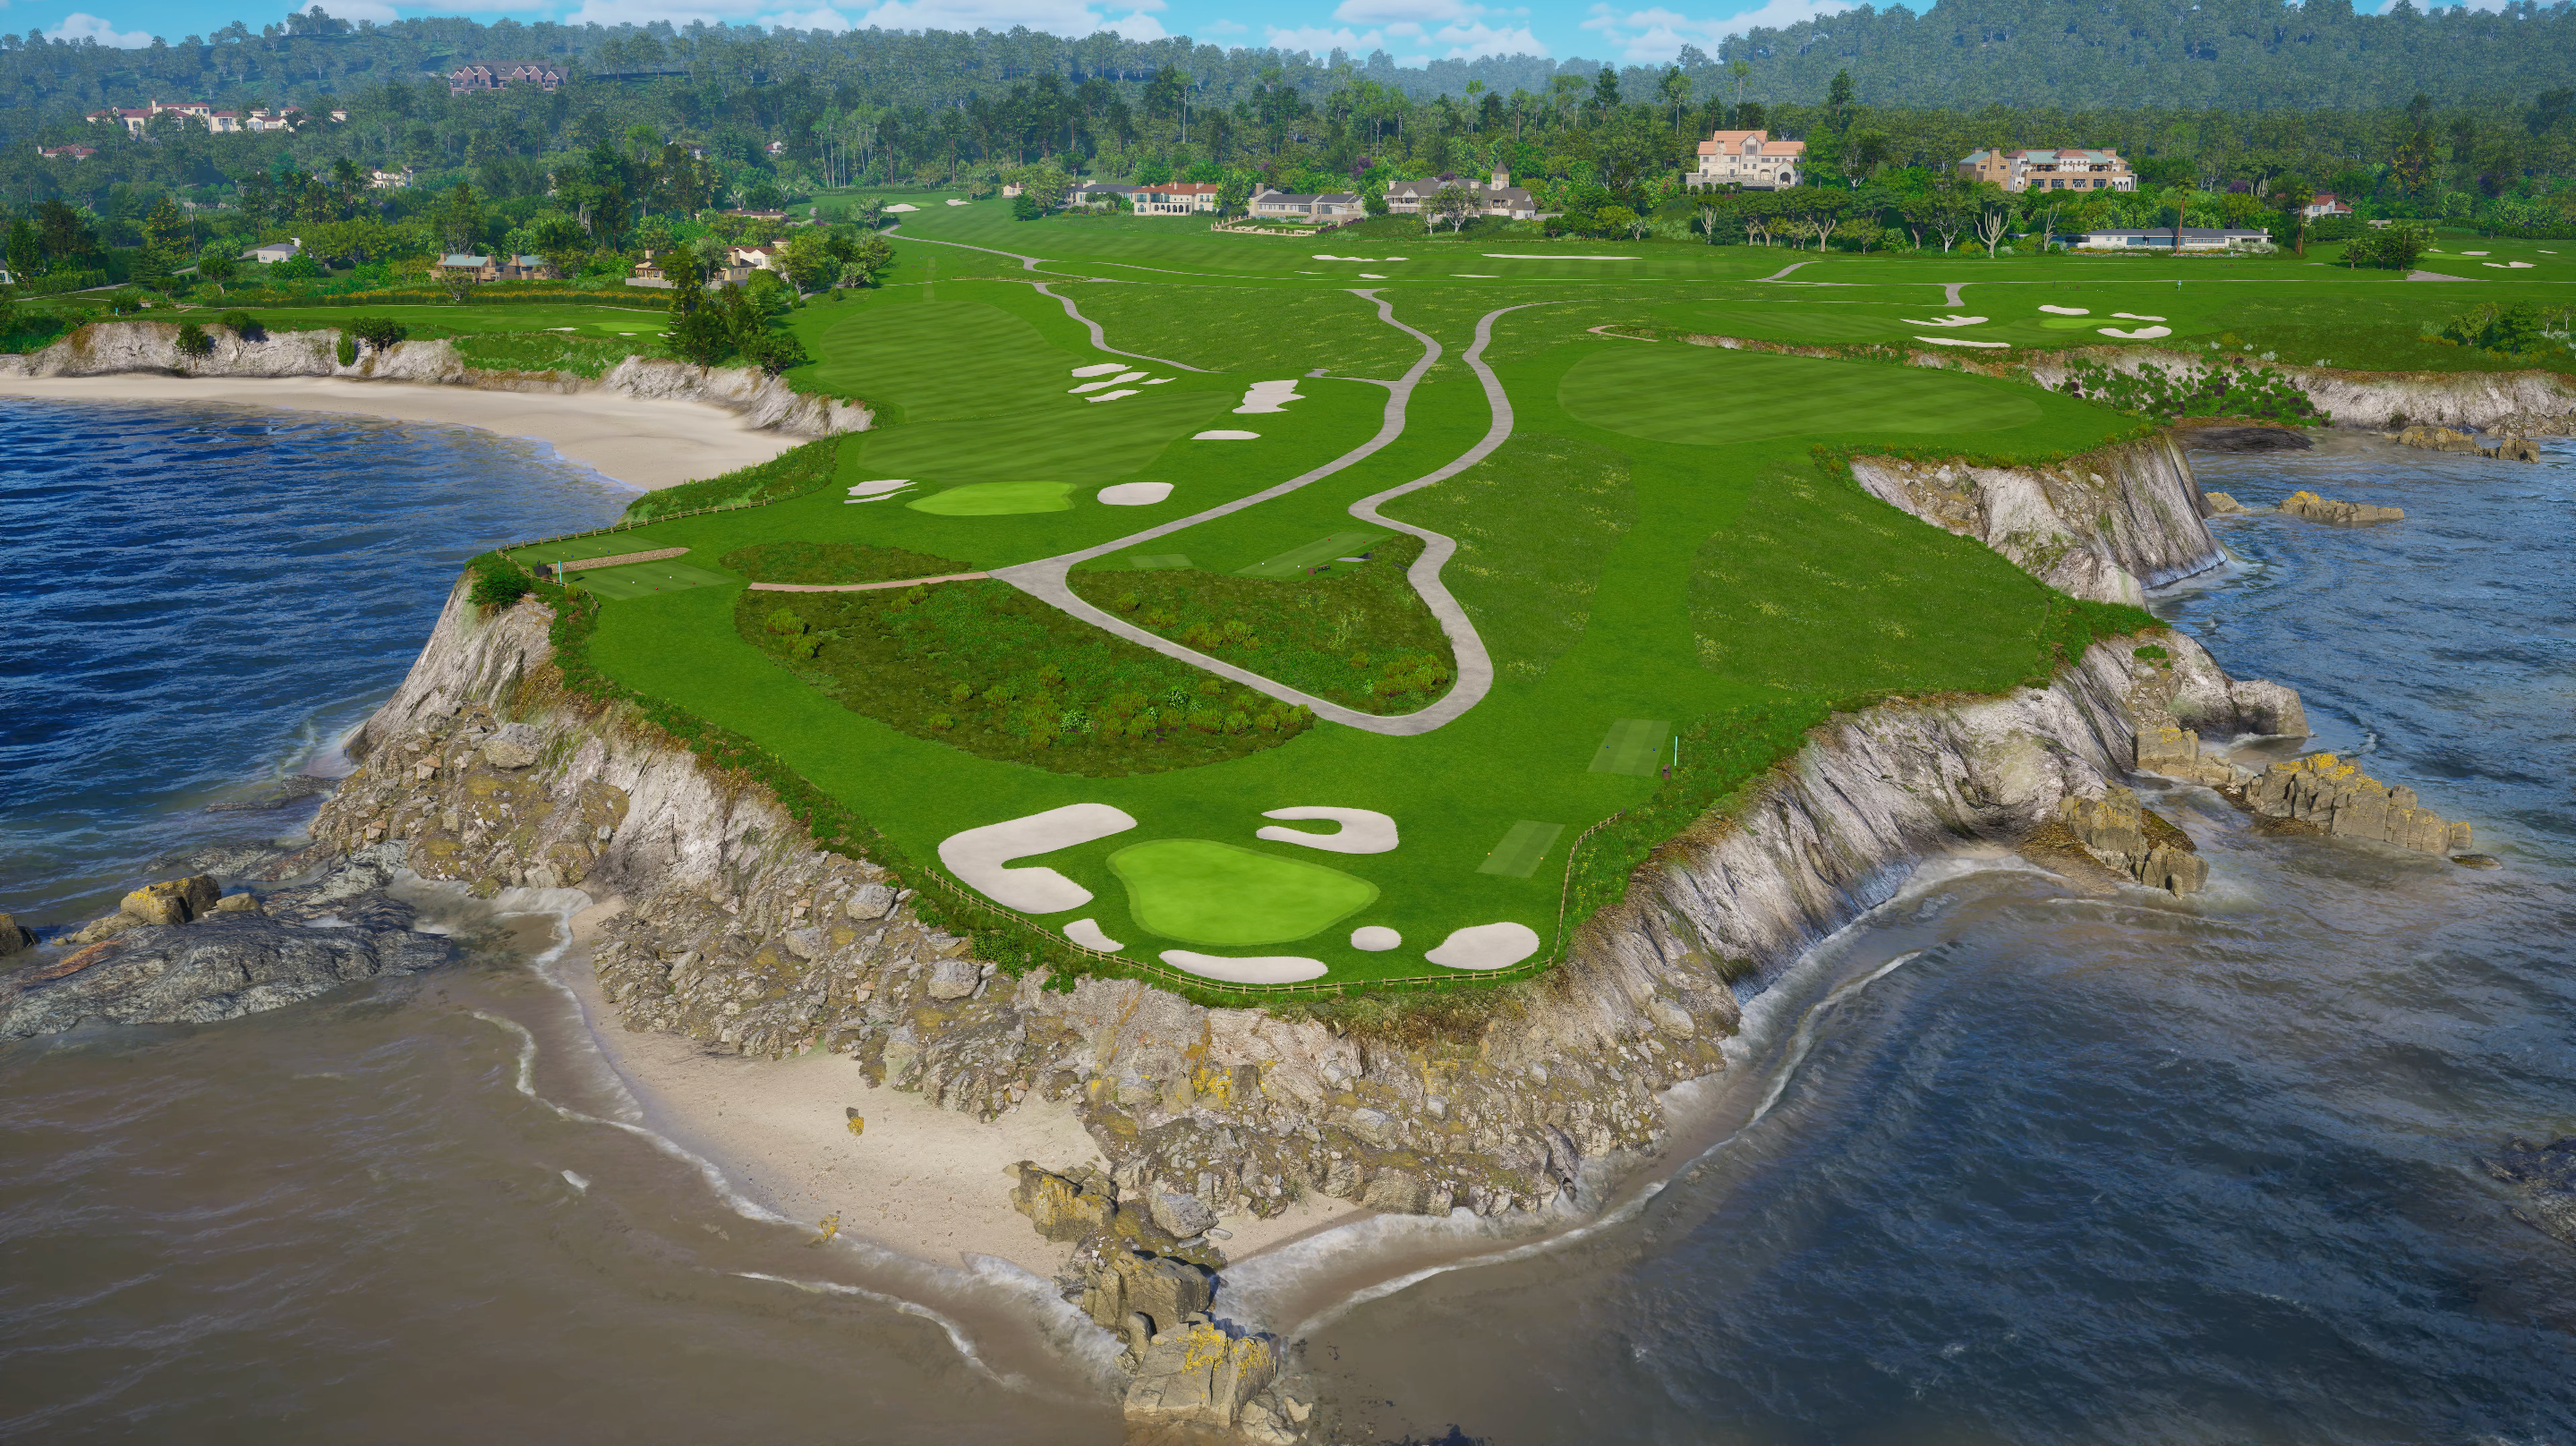 Golfing paradise at your fingertips